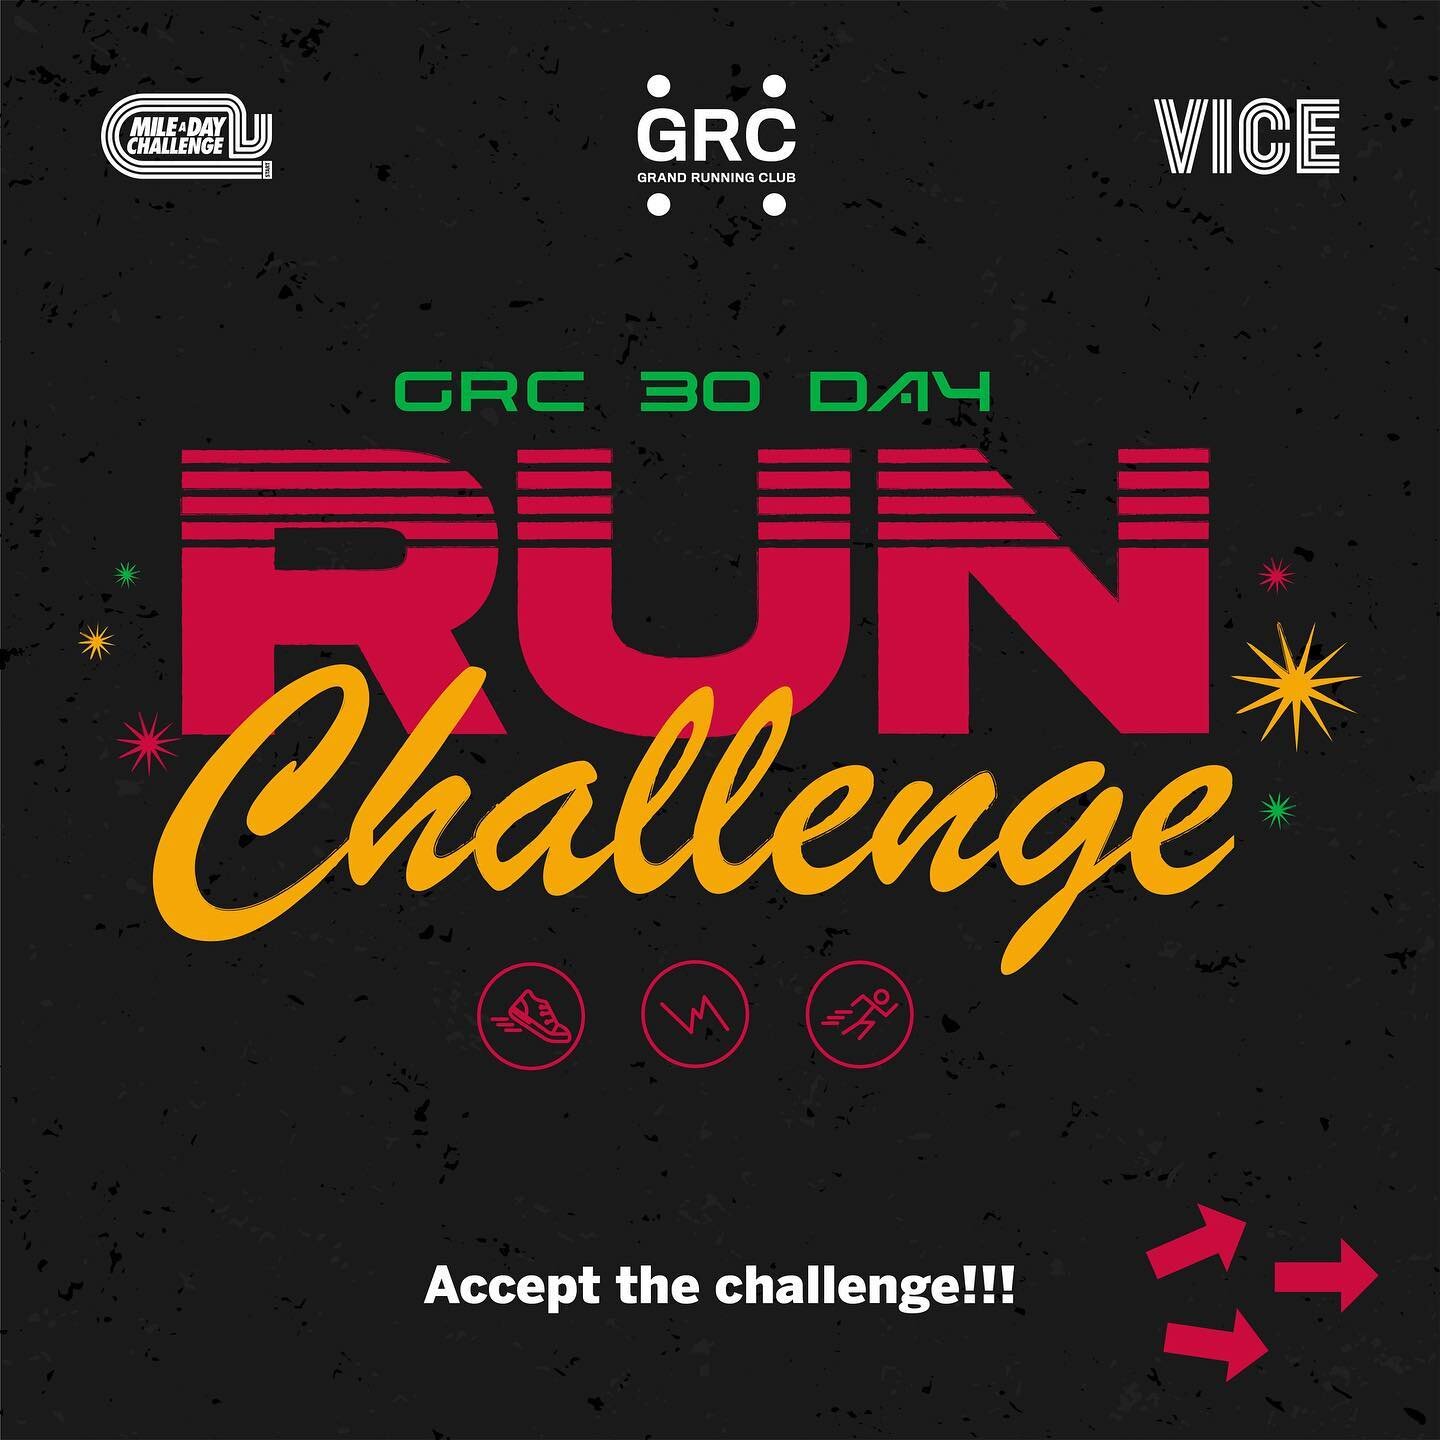 BIG UPDATE RUN FAM: We&rsquo;ve teamed up with @grandrunningclub to kick off a 30 Day Run challenge and continue growing this community! Starting tomorrow Fri April 17th - Saturday May 16th run a minimum of 1 Mile A Day! Tag us and email proof of you